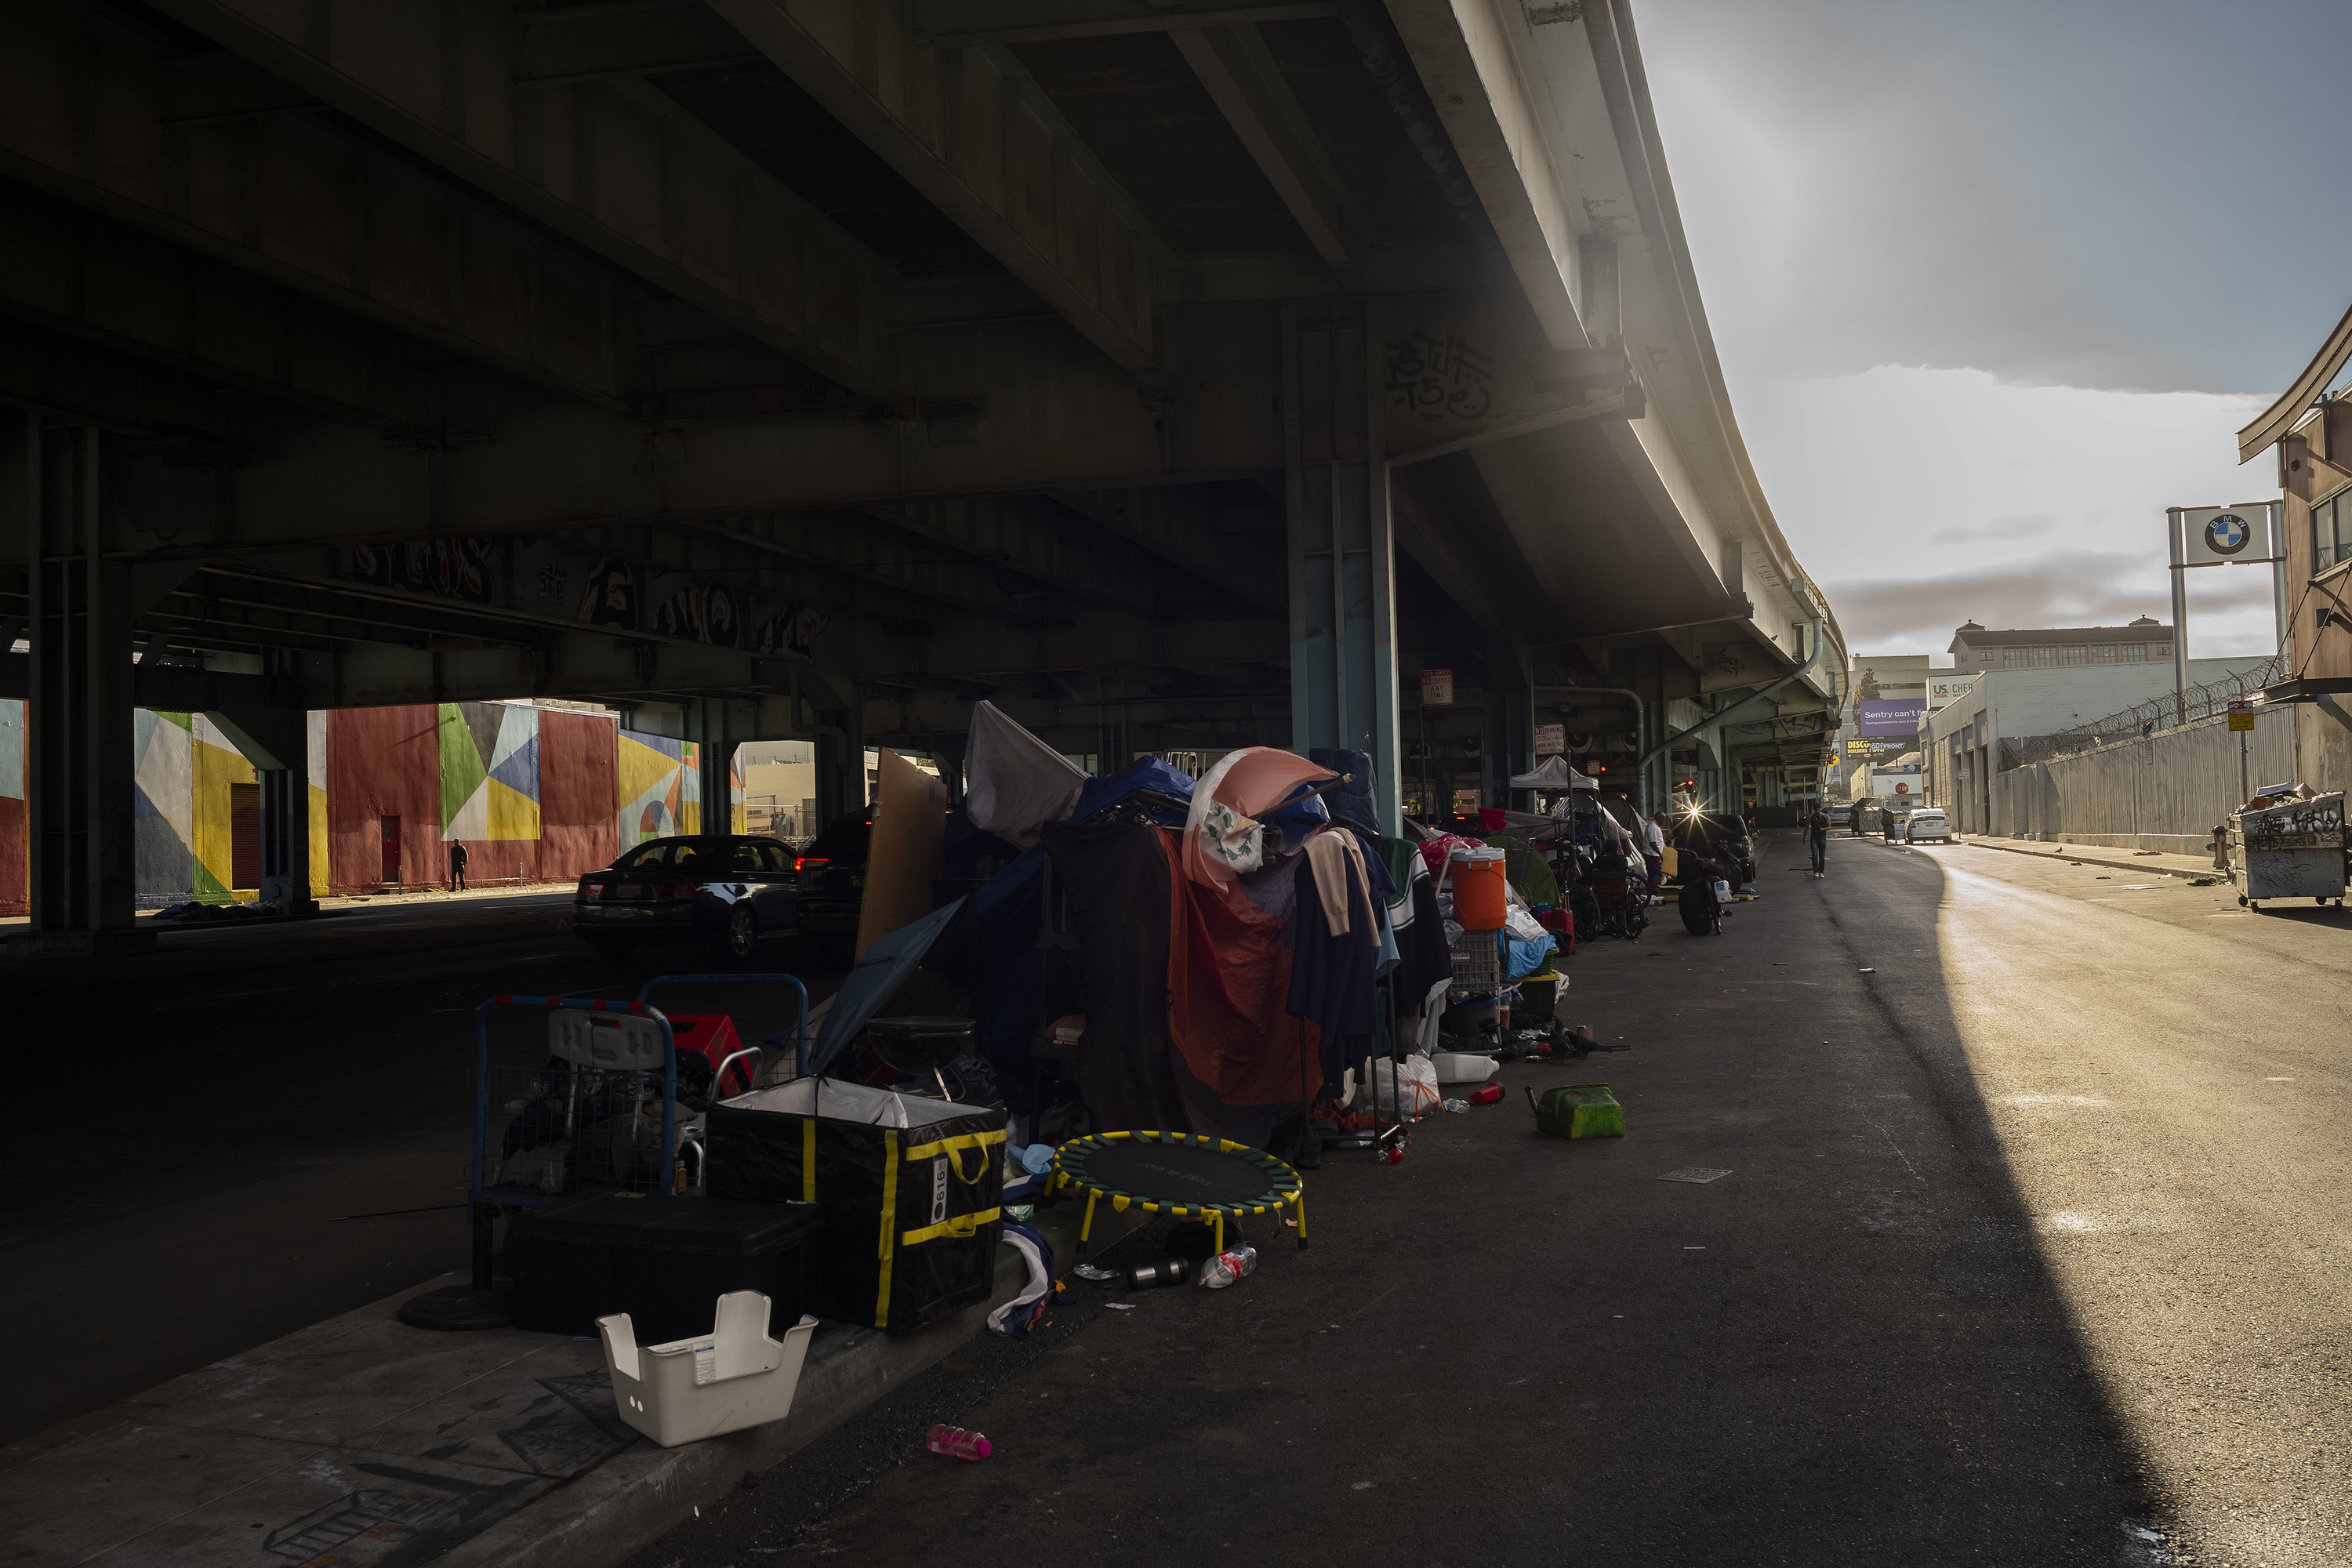 Clothes and other possessions are piled under a bridge, in a encampment for people experiencing homelessness